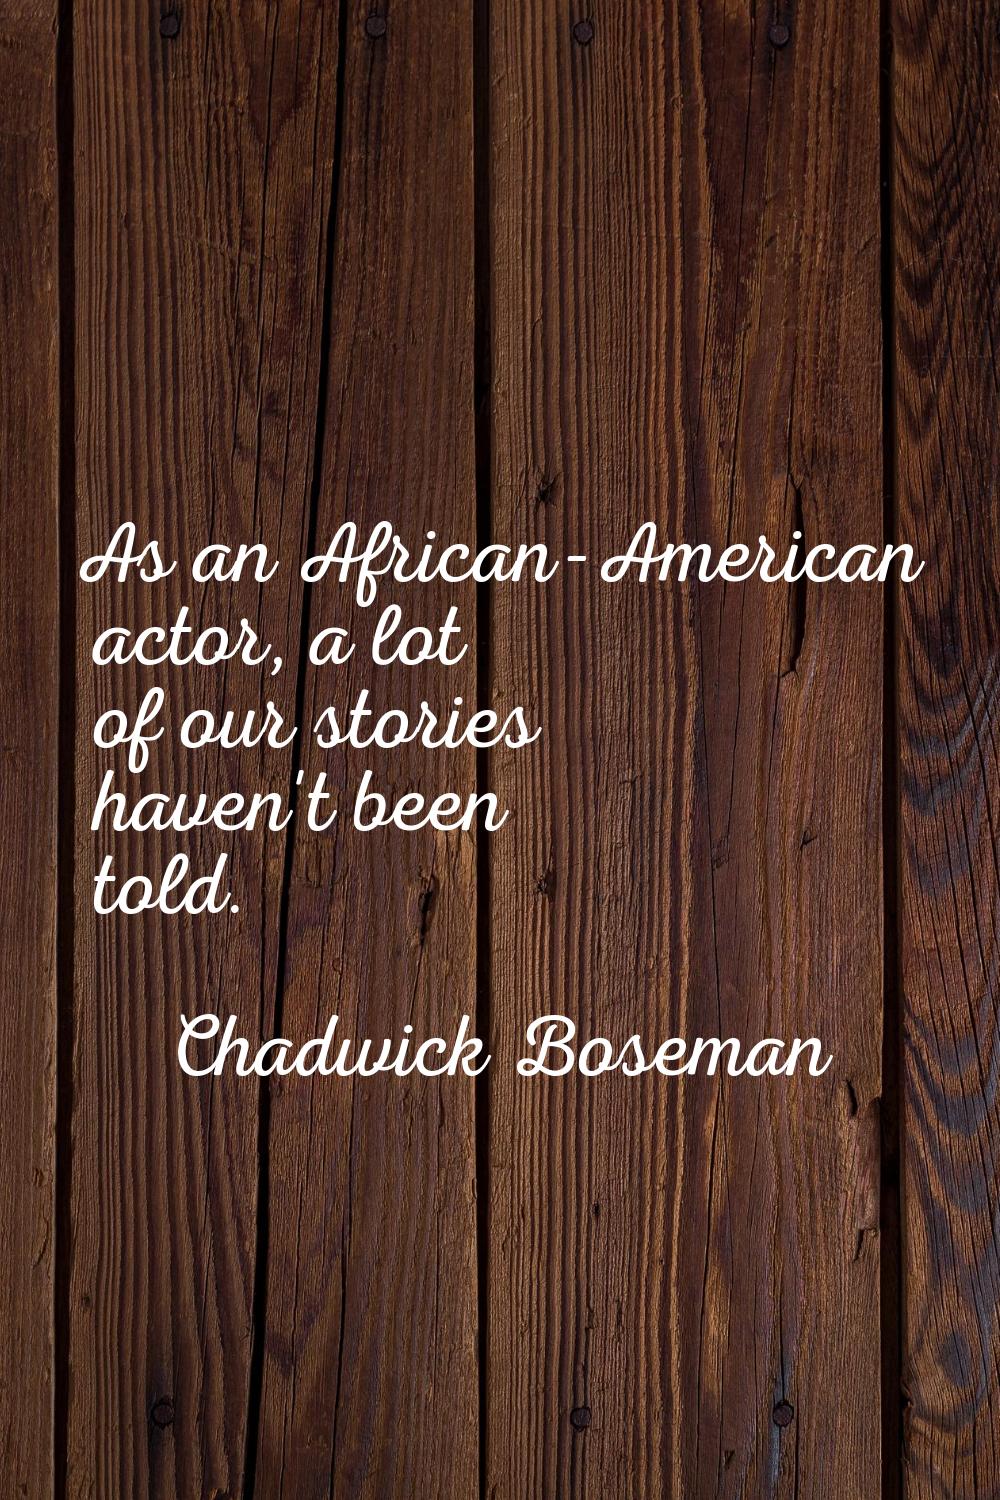 As an African-American actor, a lot of our stories haven't been told.